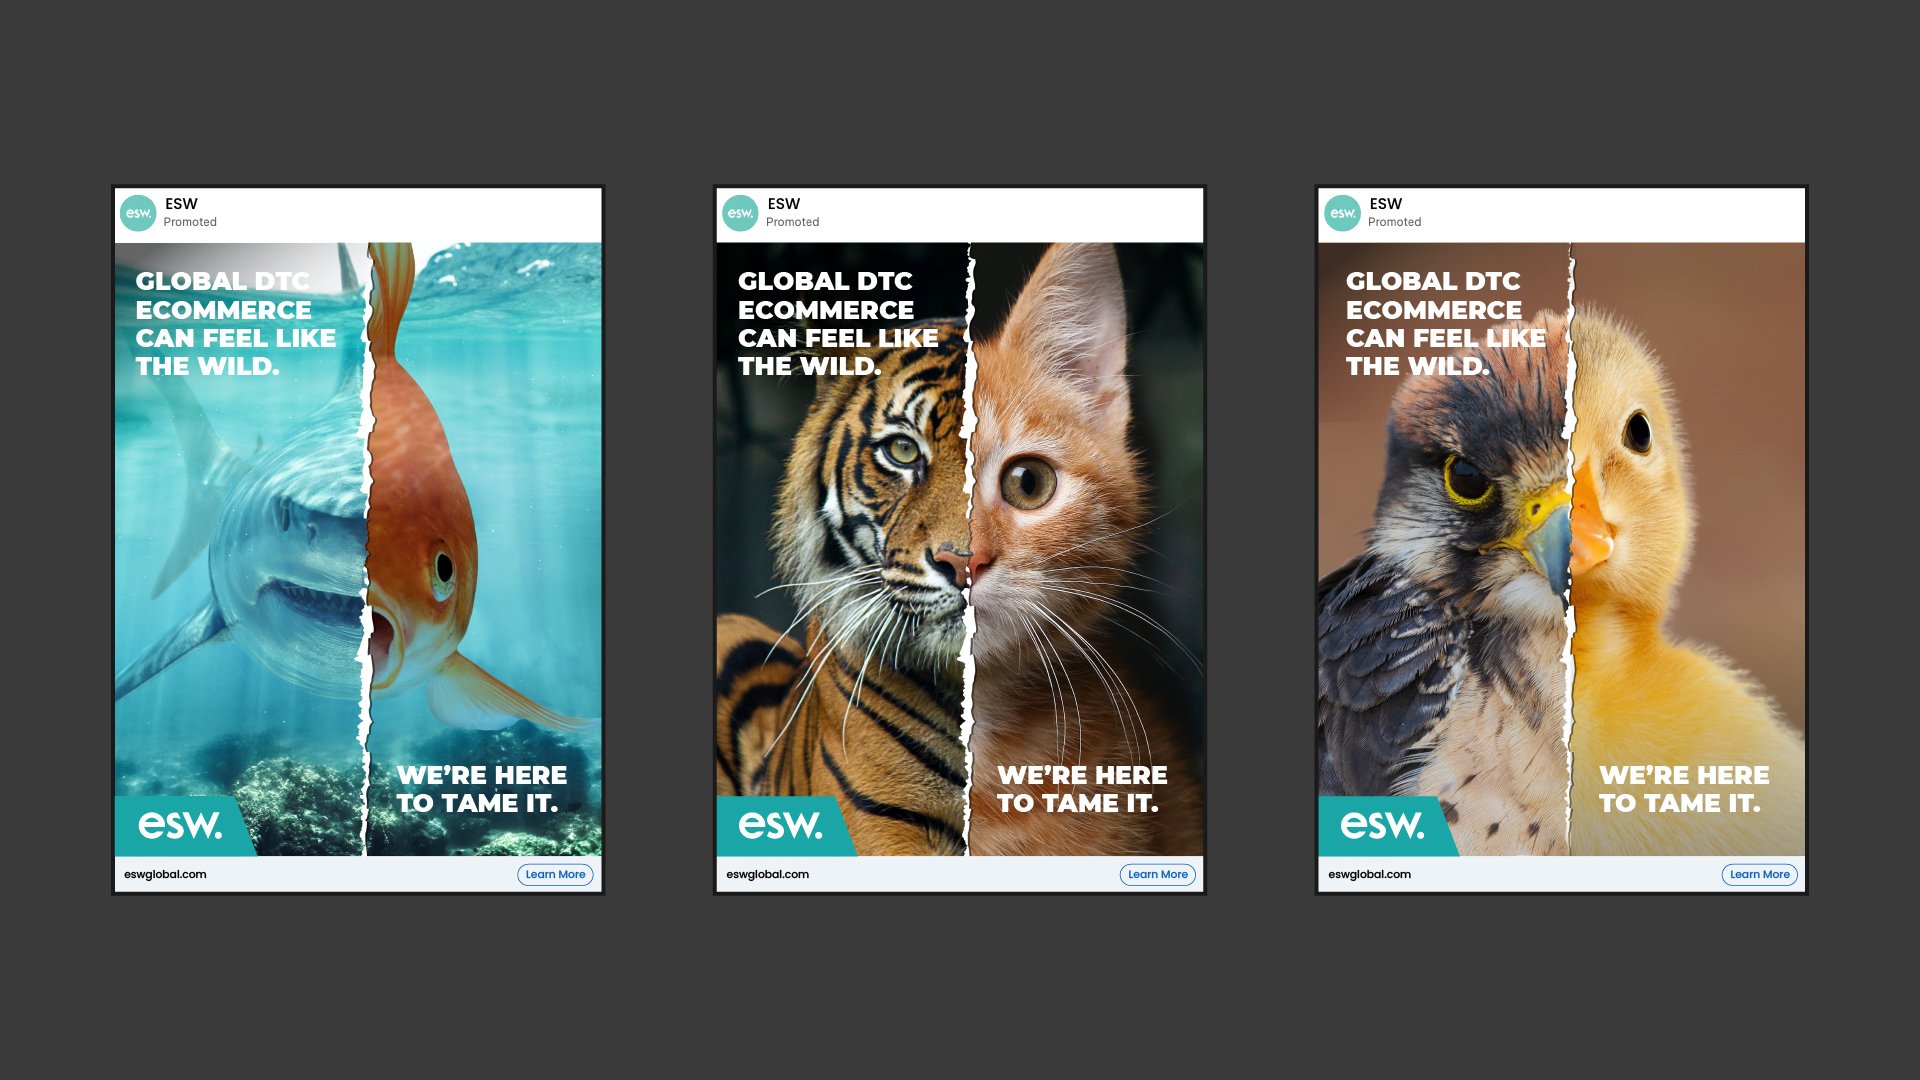 Three ad mockups show how easy it is to scale a DTC business. Each features a tear down the middle of the image to show the contrast. The first is shark and goldfish. The second is a tiger and house cat. The third is a hawk and a duckling.